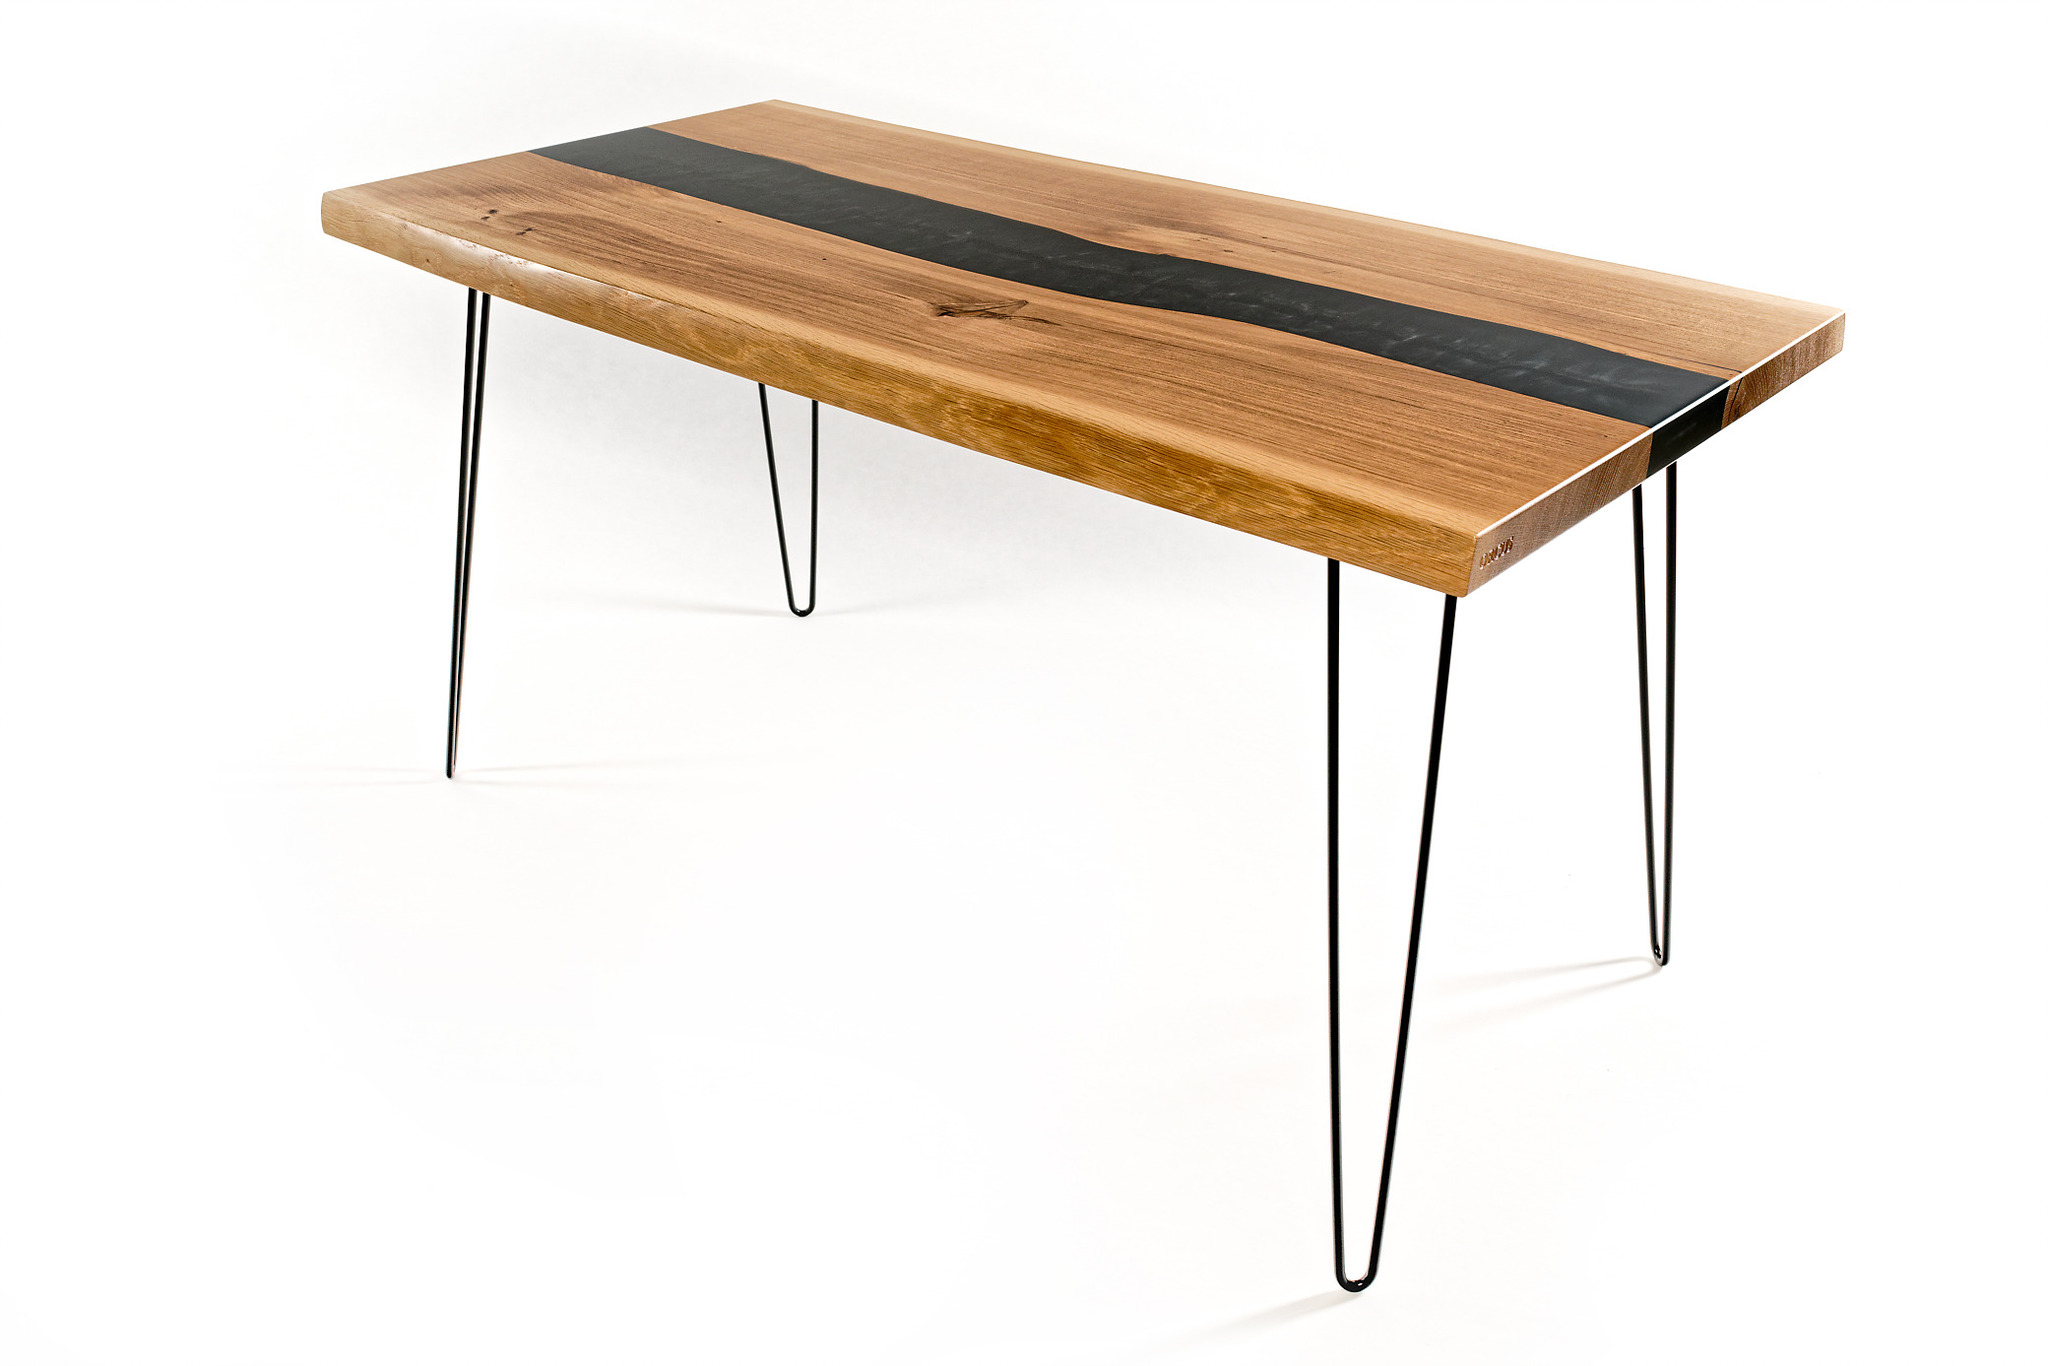 Orcus – oak wood table with black epoxy resin